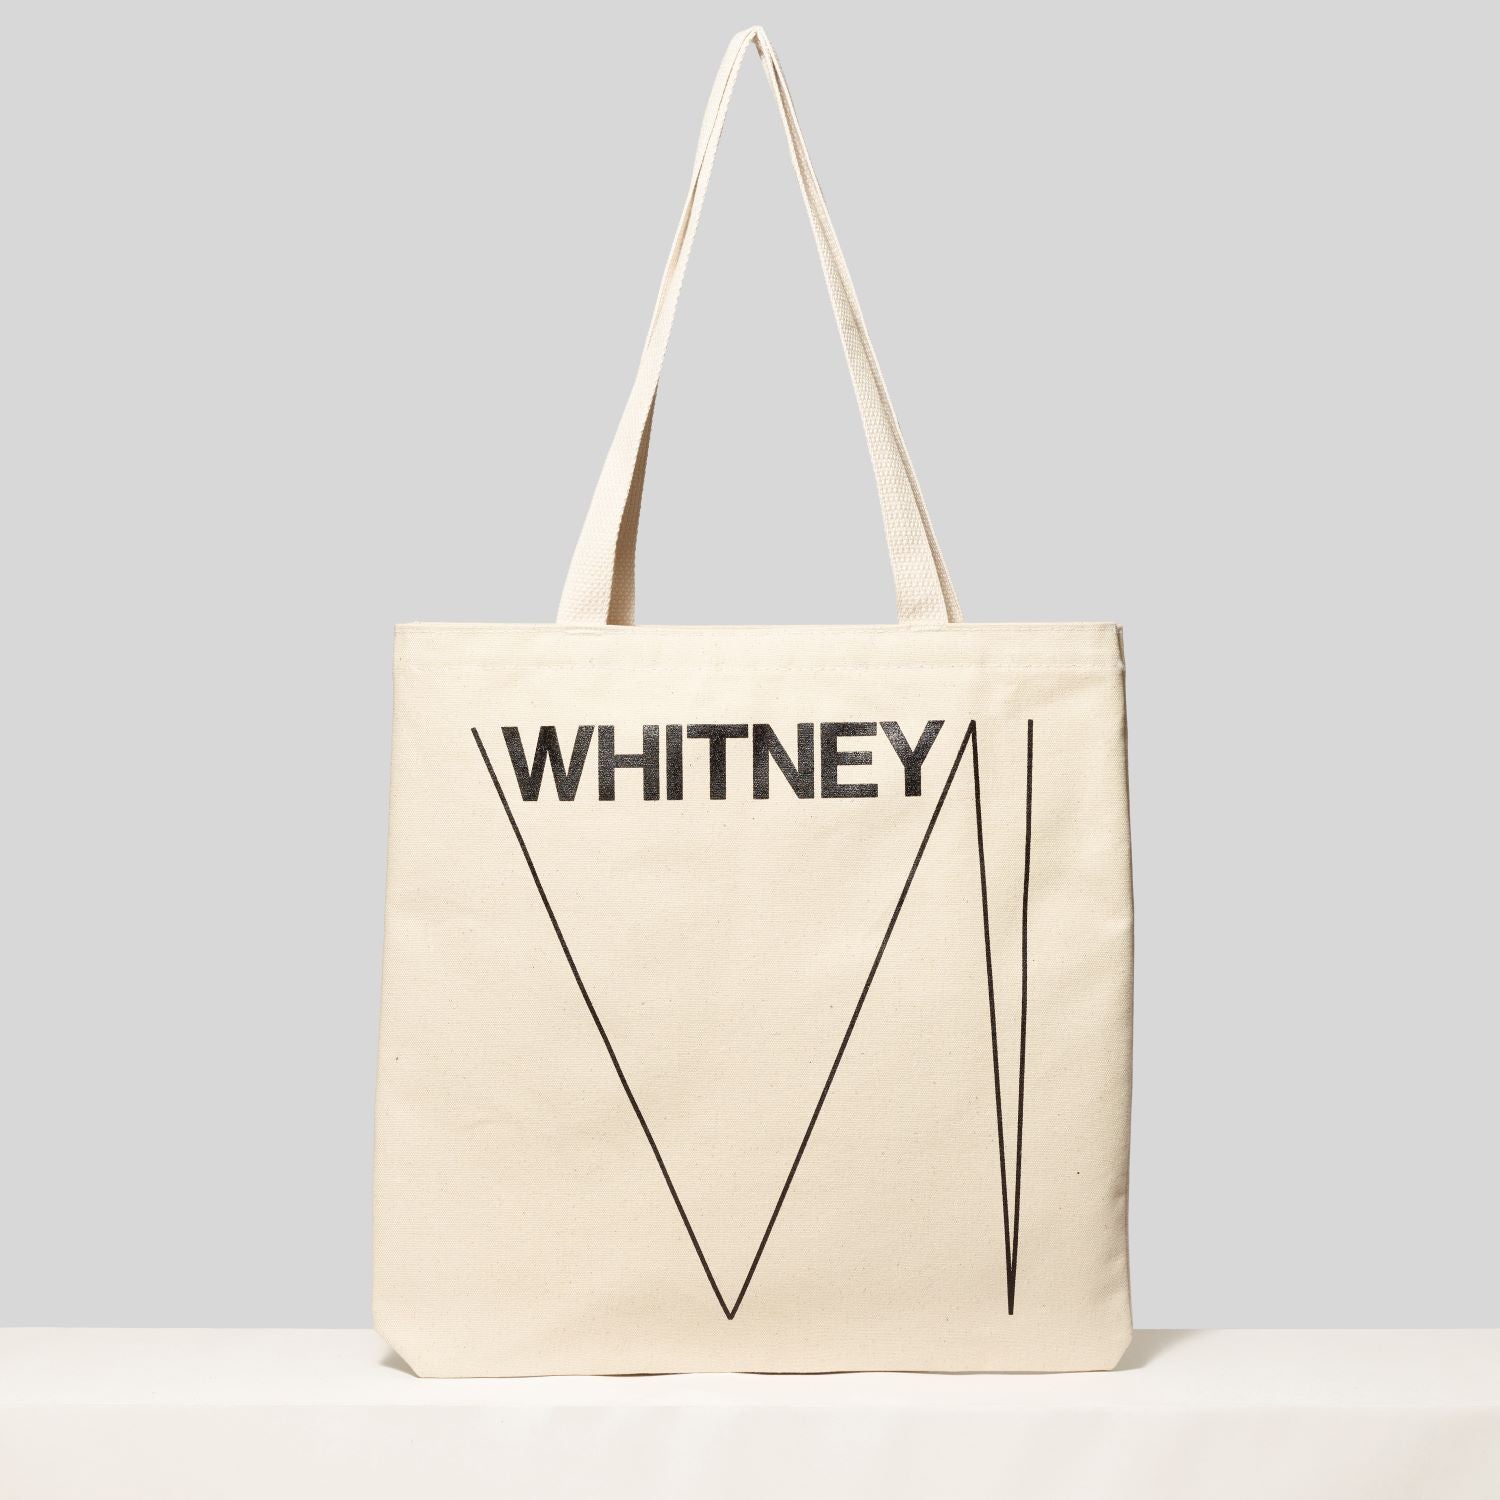 100% cotton canvas tote featuring the Whitney and logo. Measures 13.75" H x 13" L